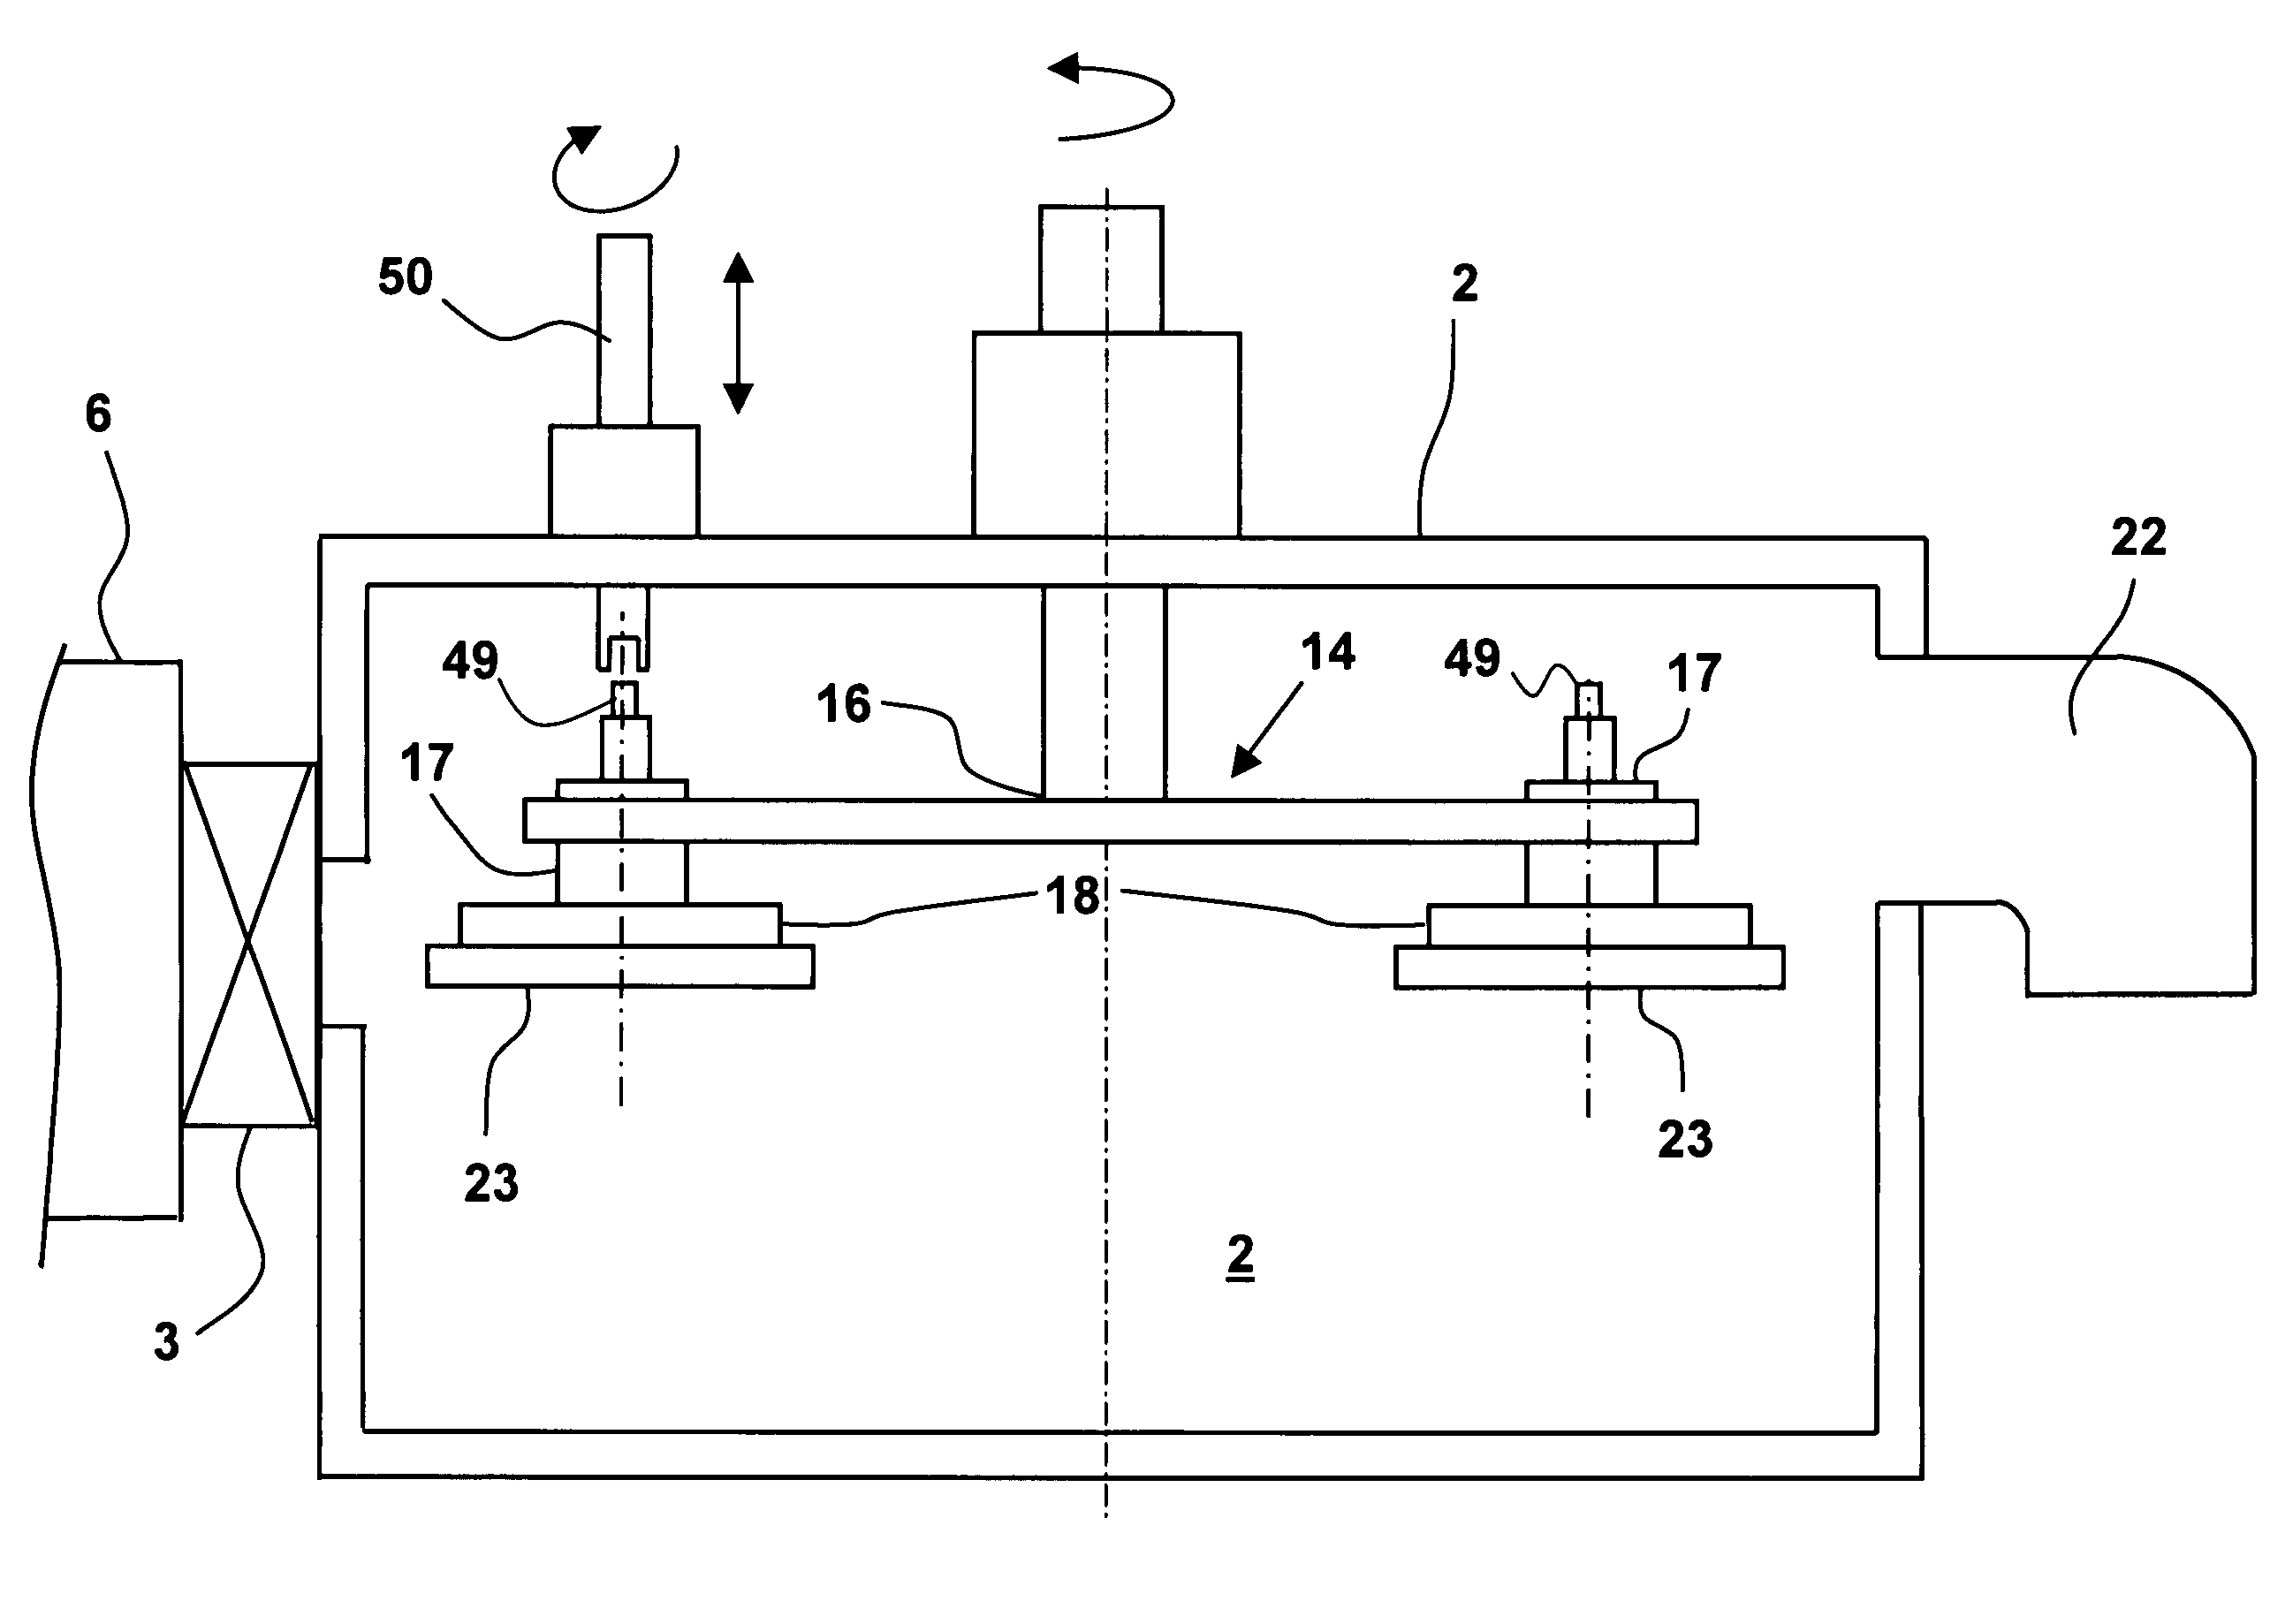 Substrate holder for a vapour deposition system